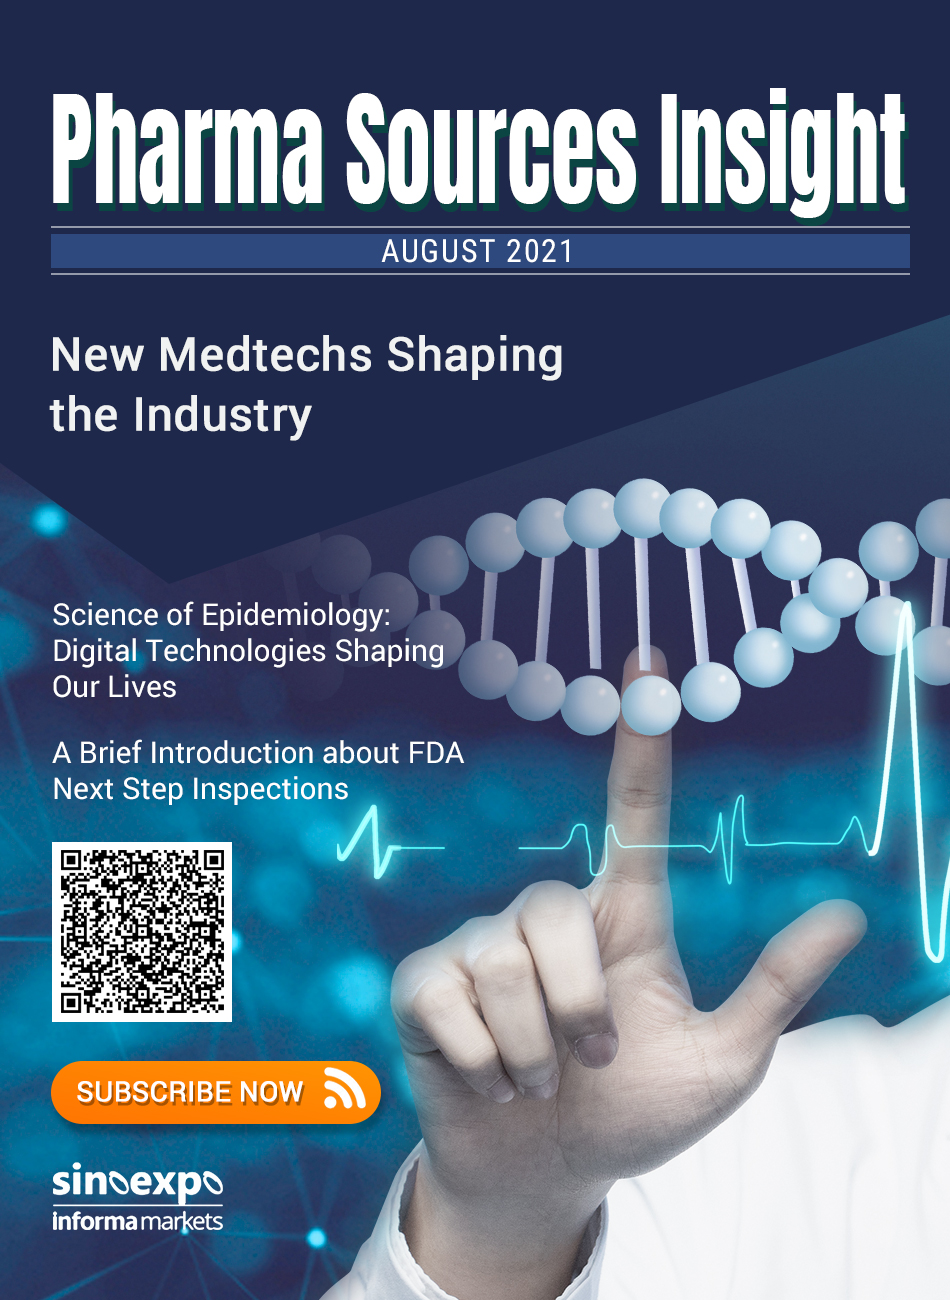 Pharma Sources Insight August 2021: New Medtechs Shaping the Industry